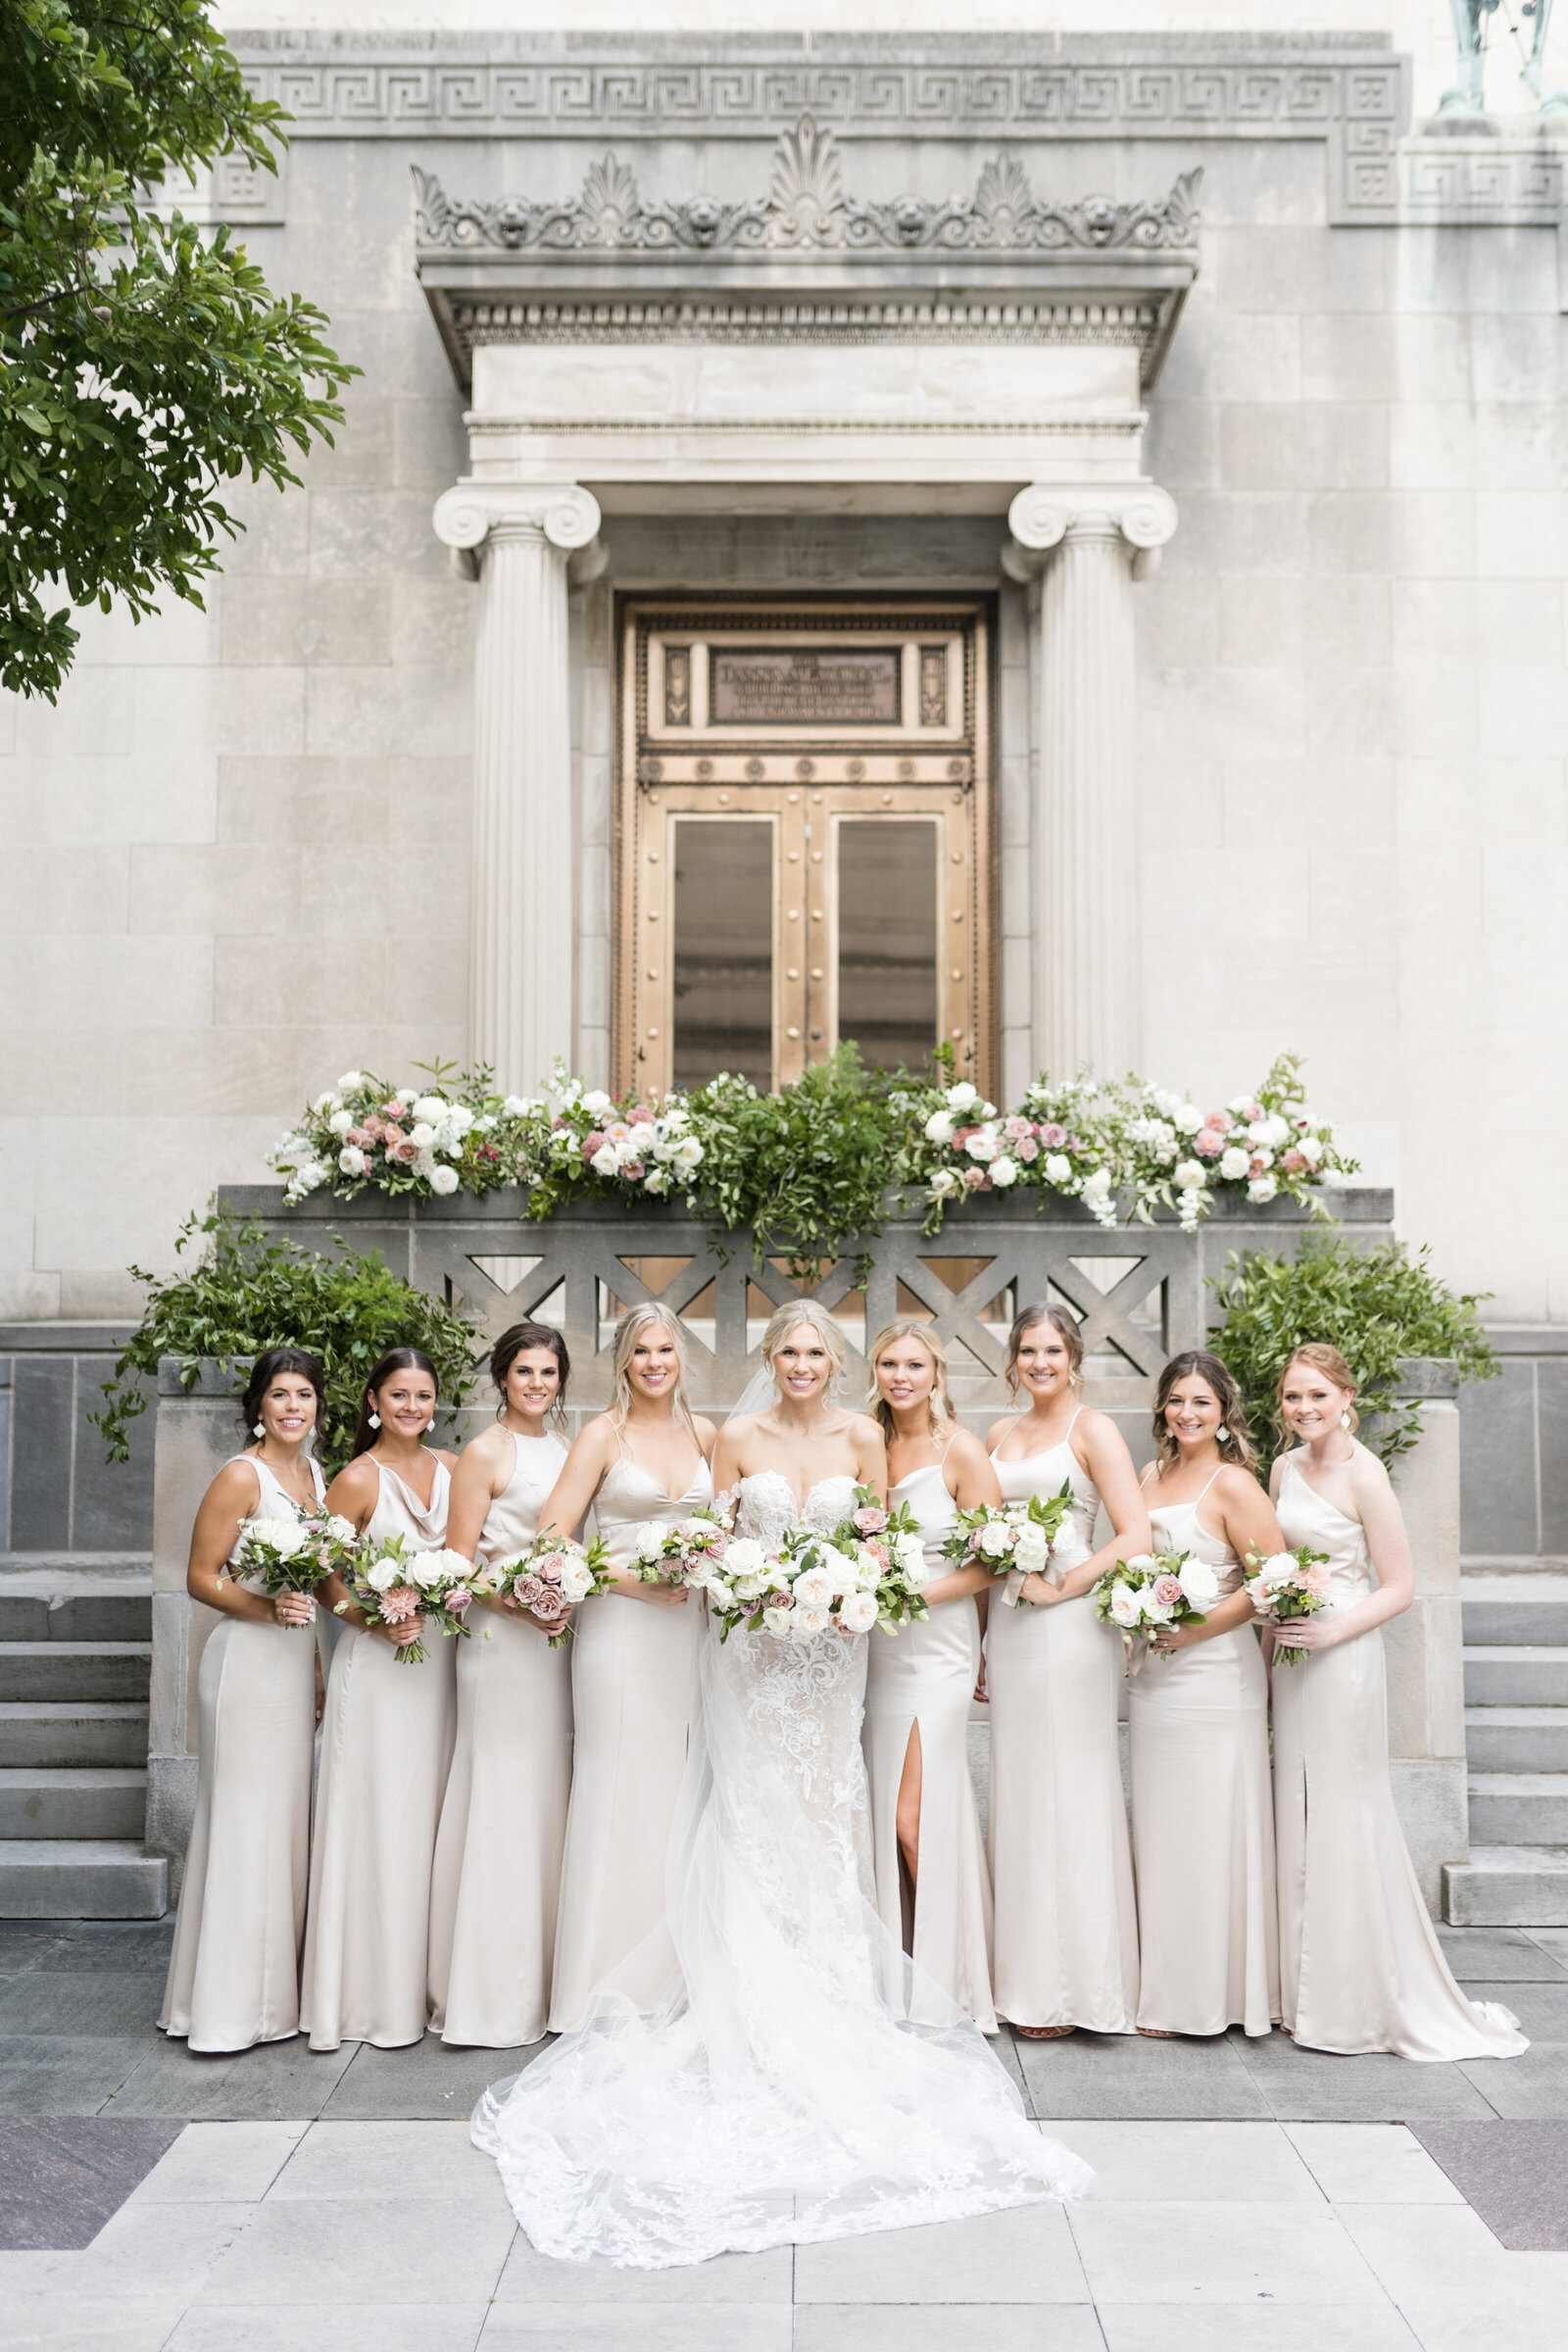 bride and bridesmaids at ceremony site